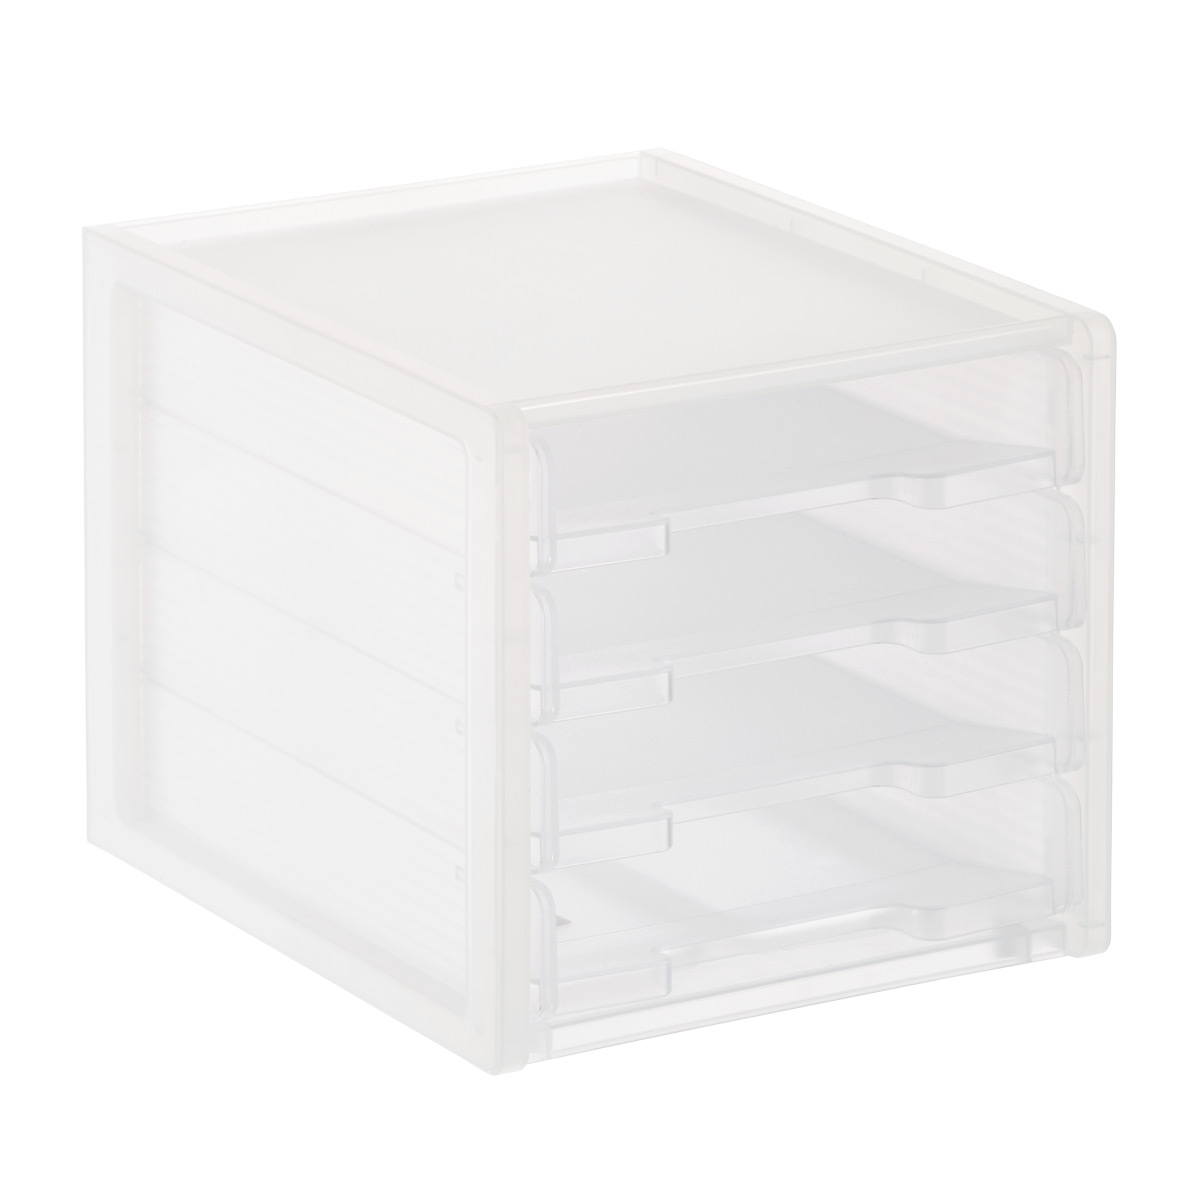 https://www.containerstore.com/catalogimages/378805/10079318-shimo-4-tray-paper-sorter-v.jpg